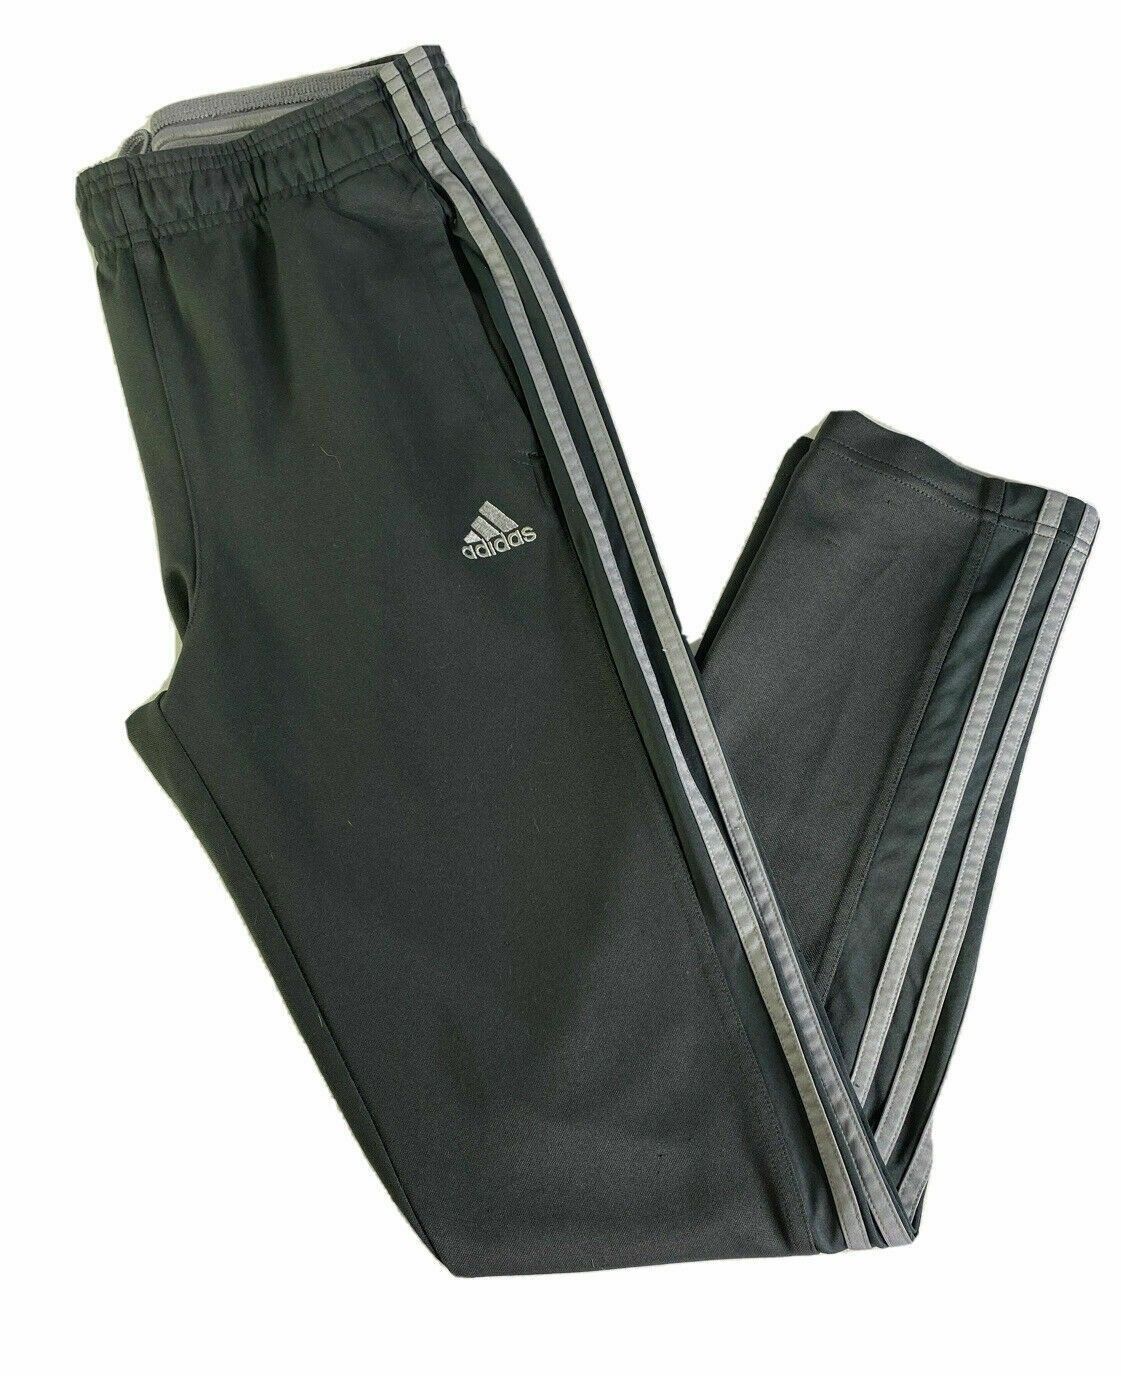 ORIGINAL Adidas Men’s Gray Clima365 Athletic Pants with Pockets & Ankle Zipper